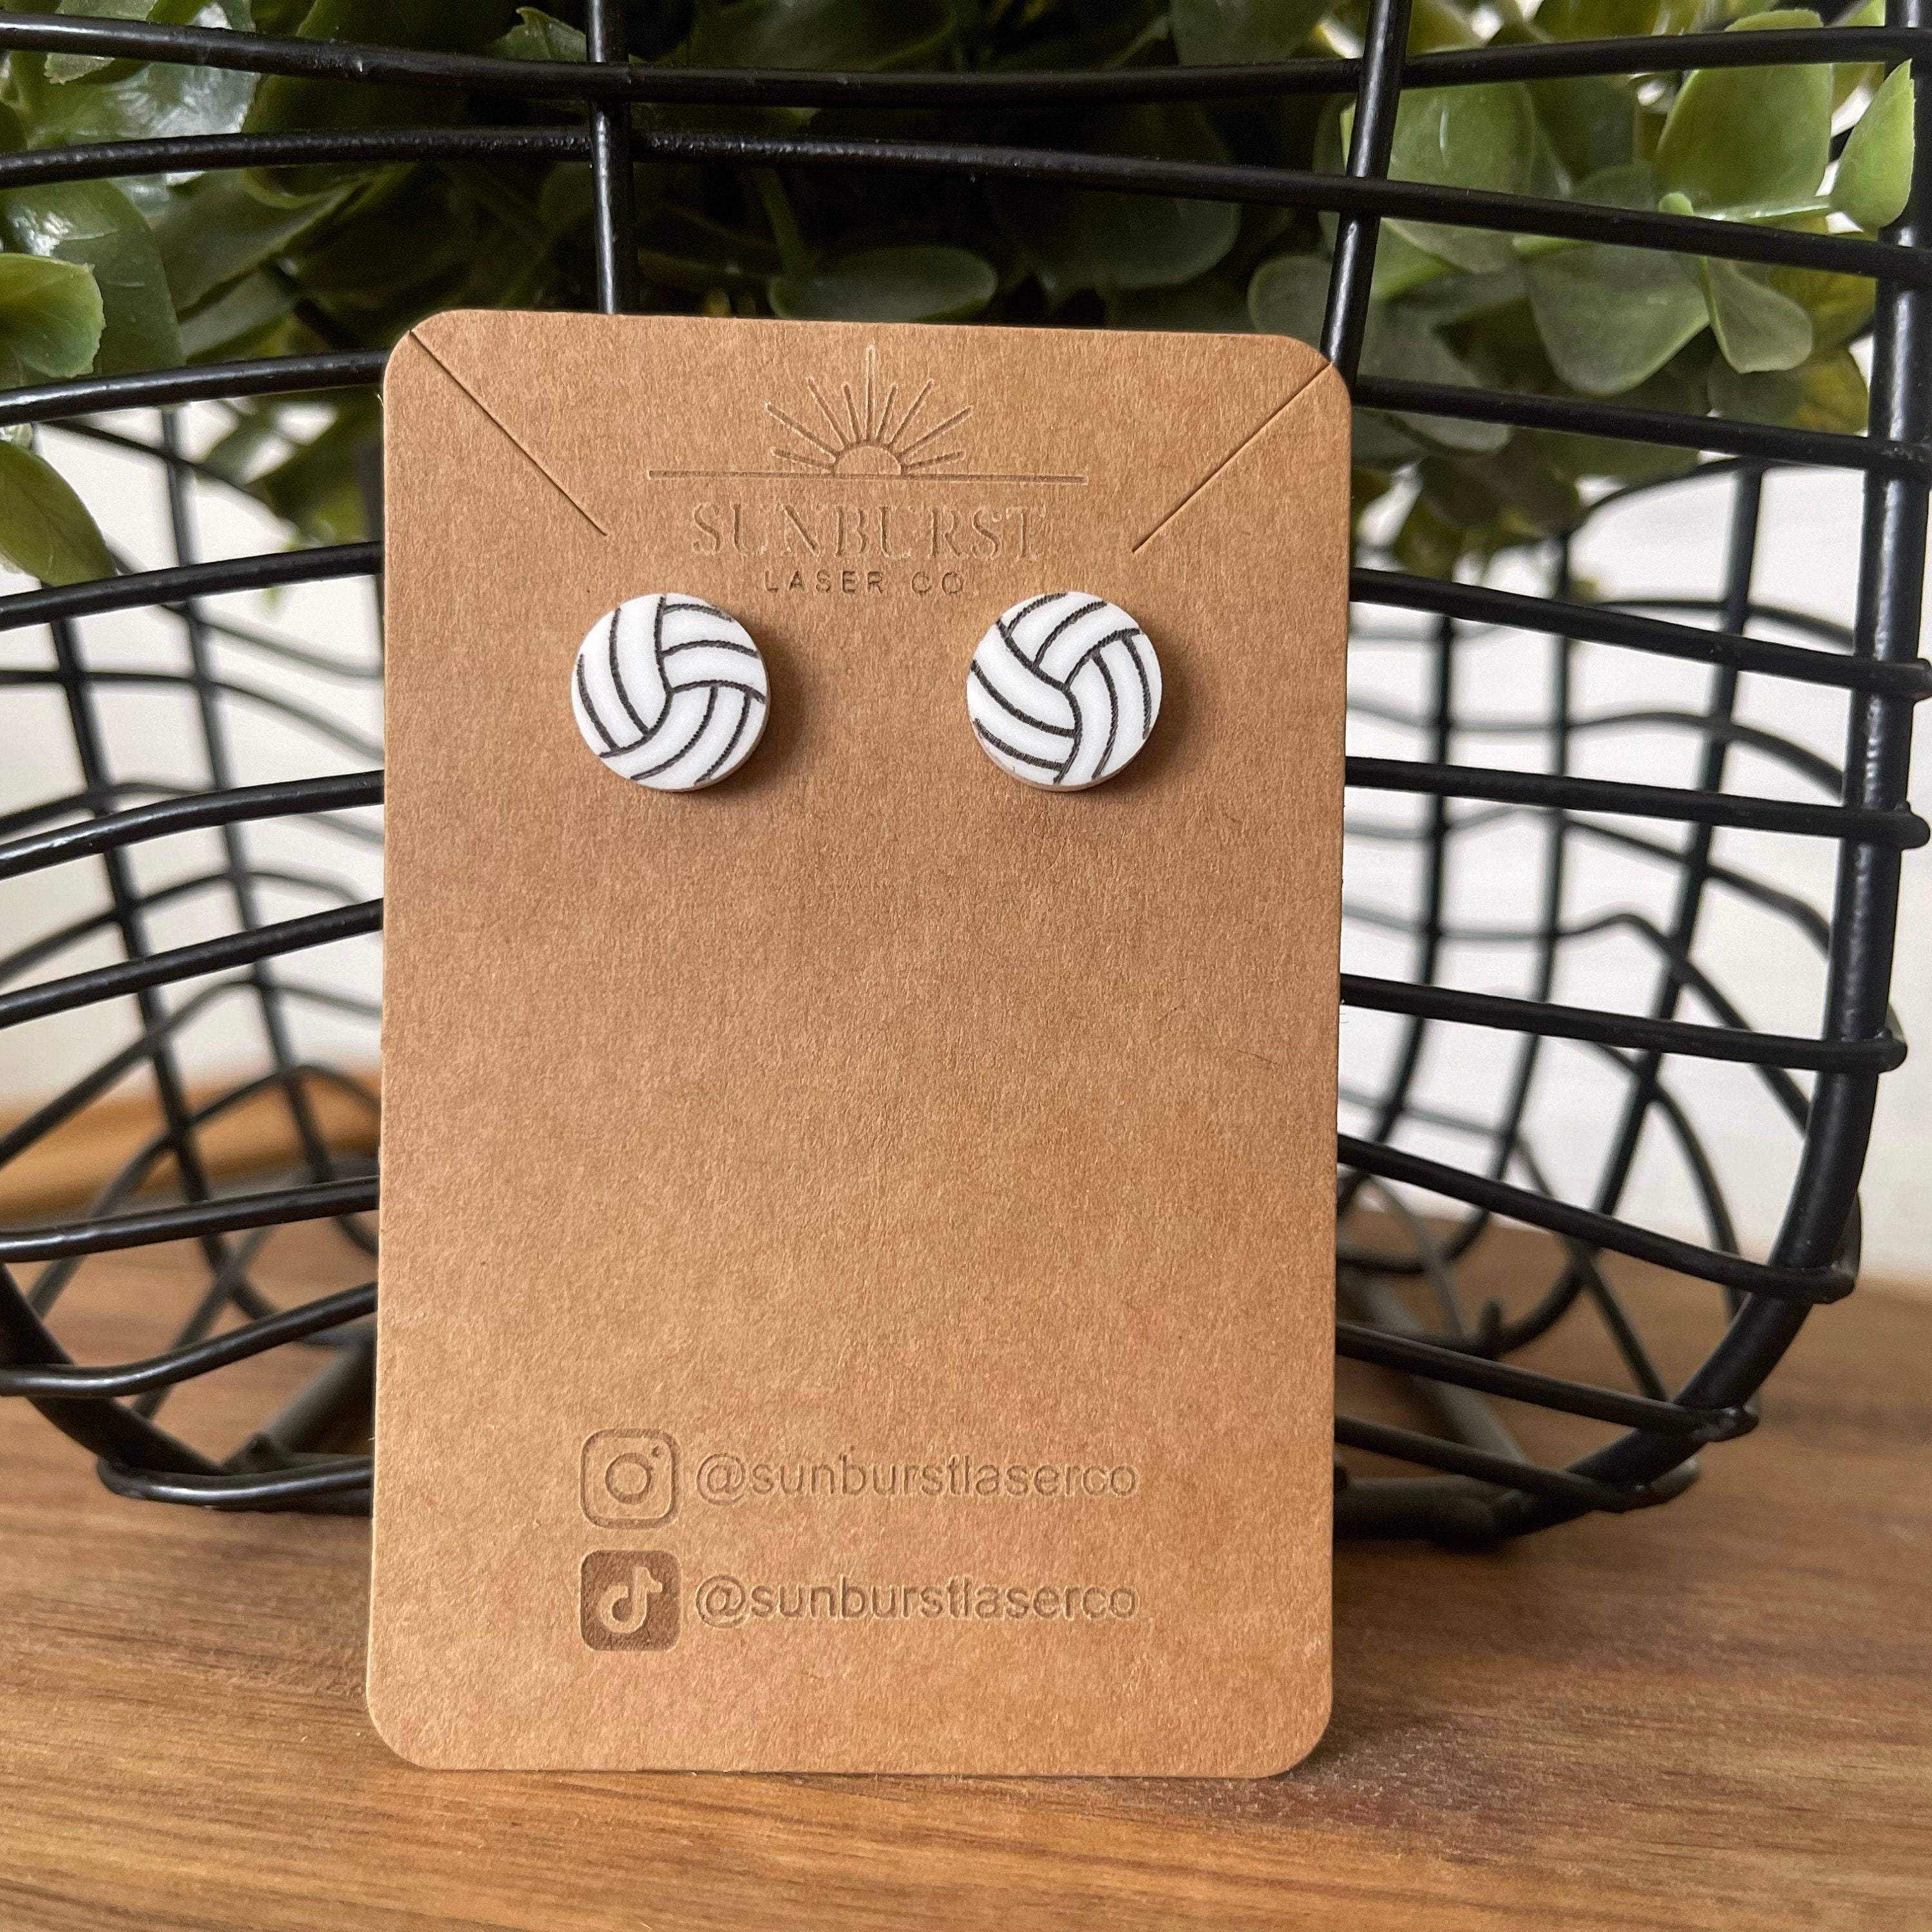 Mom Basketball / Soccer / Volleyball Design Dangle Earrings Simple Sporty Style Wooden Jewelry, Jewels Creative Sports Game Day Earrings, 0.99